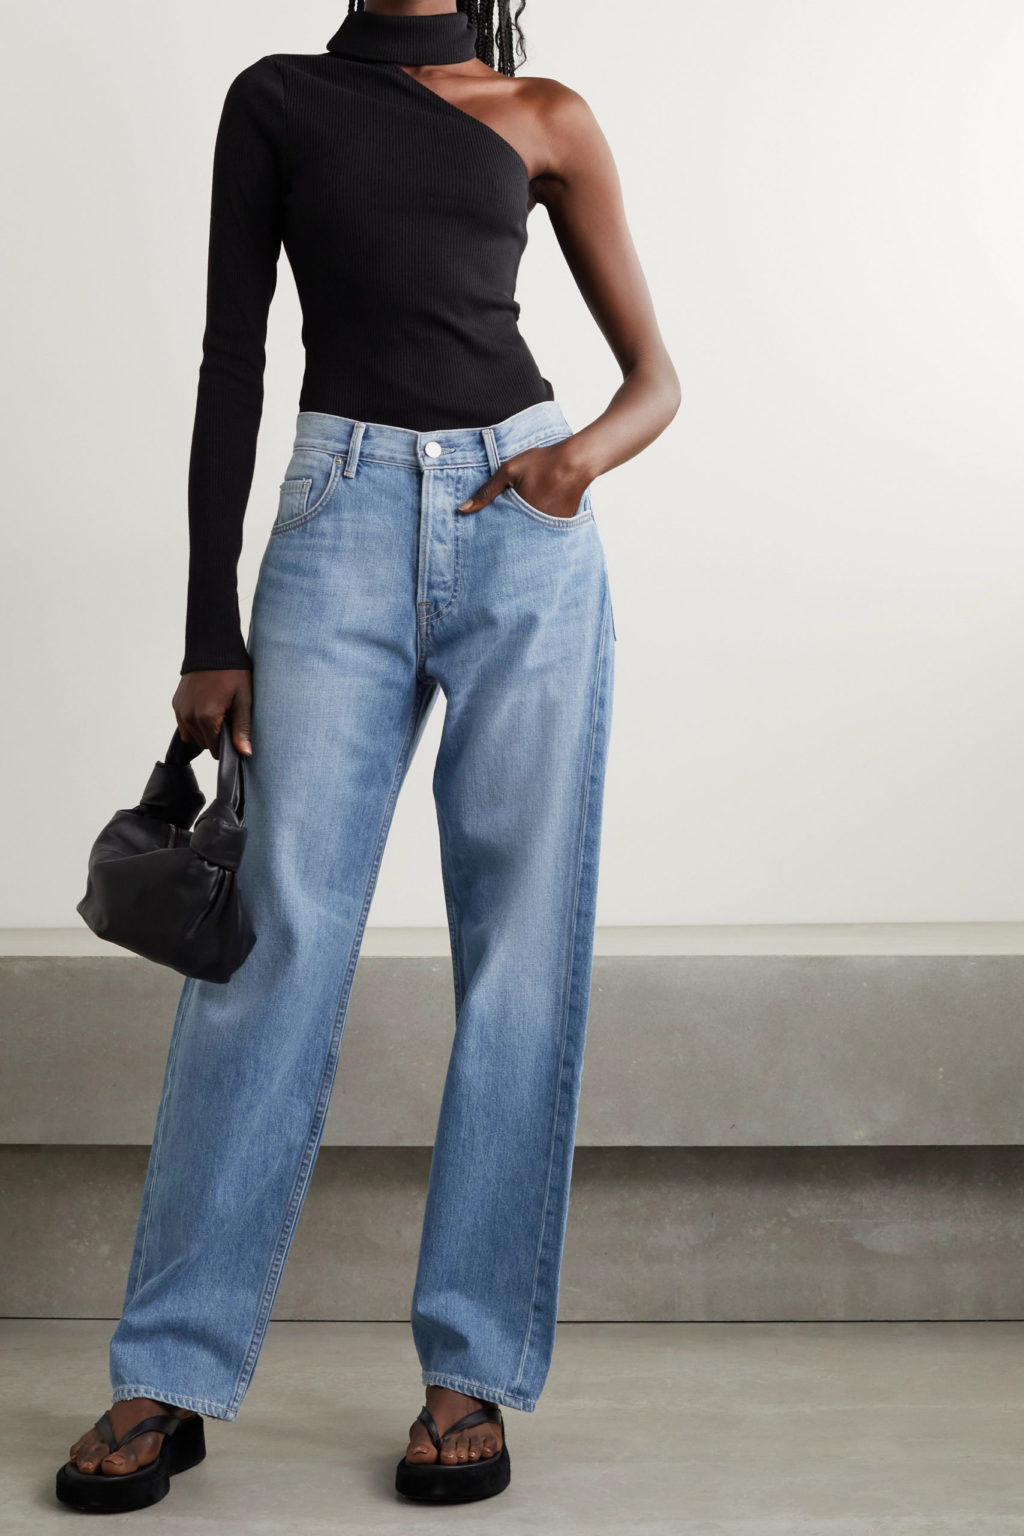 How to choose the perfect jeans, according to your body type